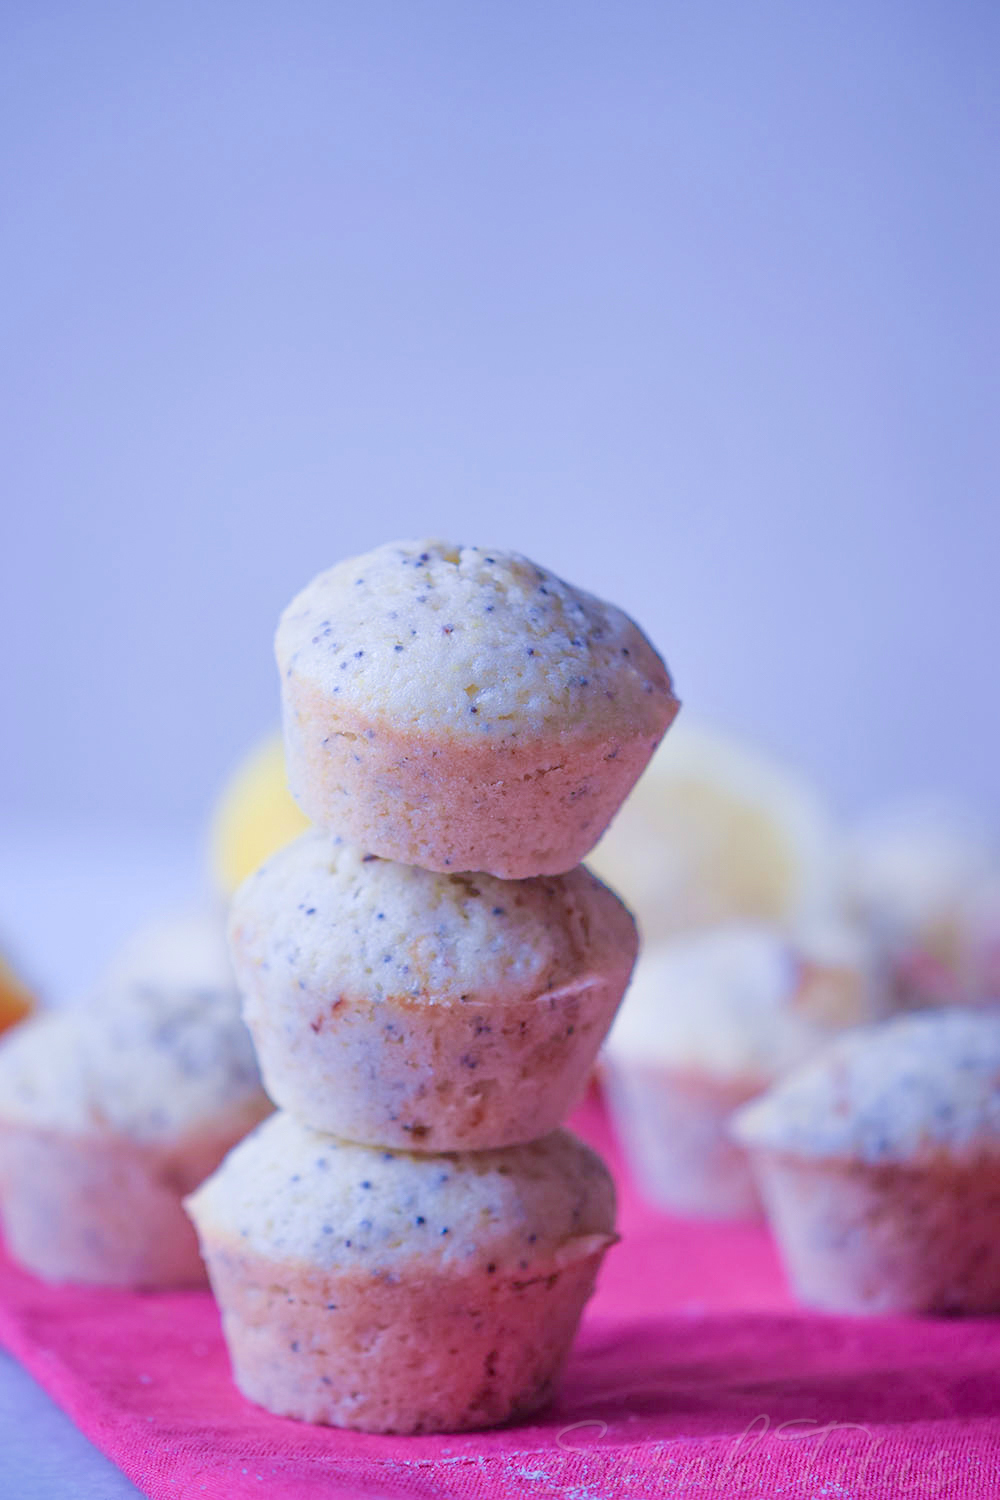 Freshly baked lemon poppy muffins in a stack on a pink cloth napkin